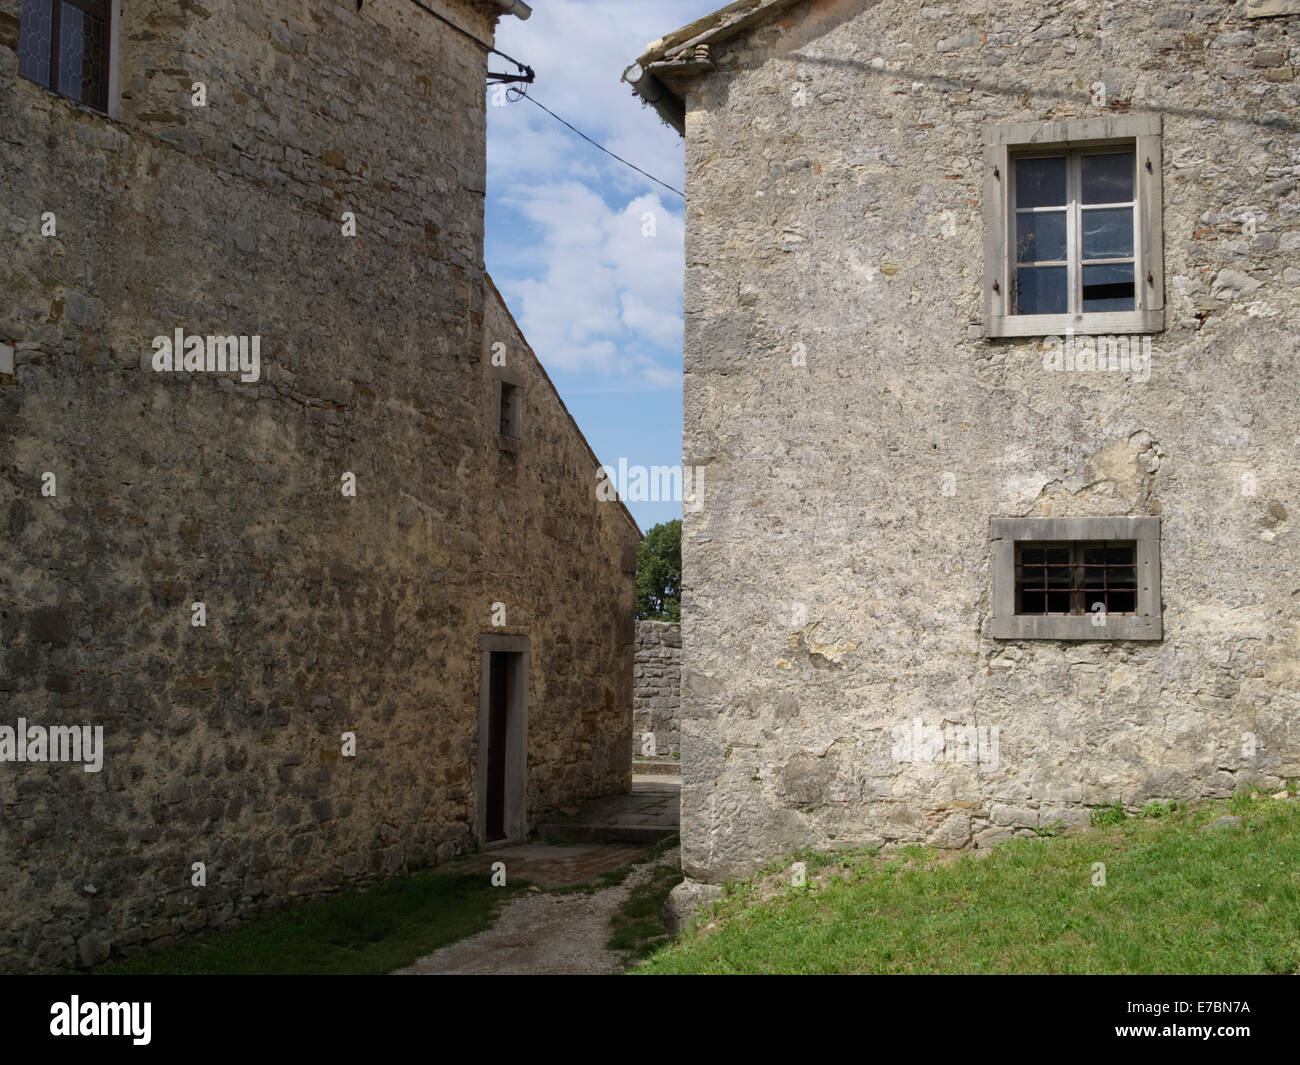 Houses in Hum, the smallest town in the world, located in Croatia. Stock Photo